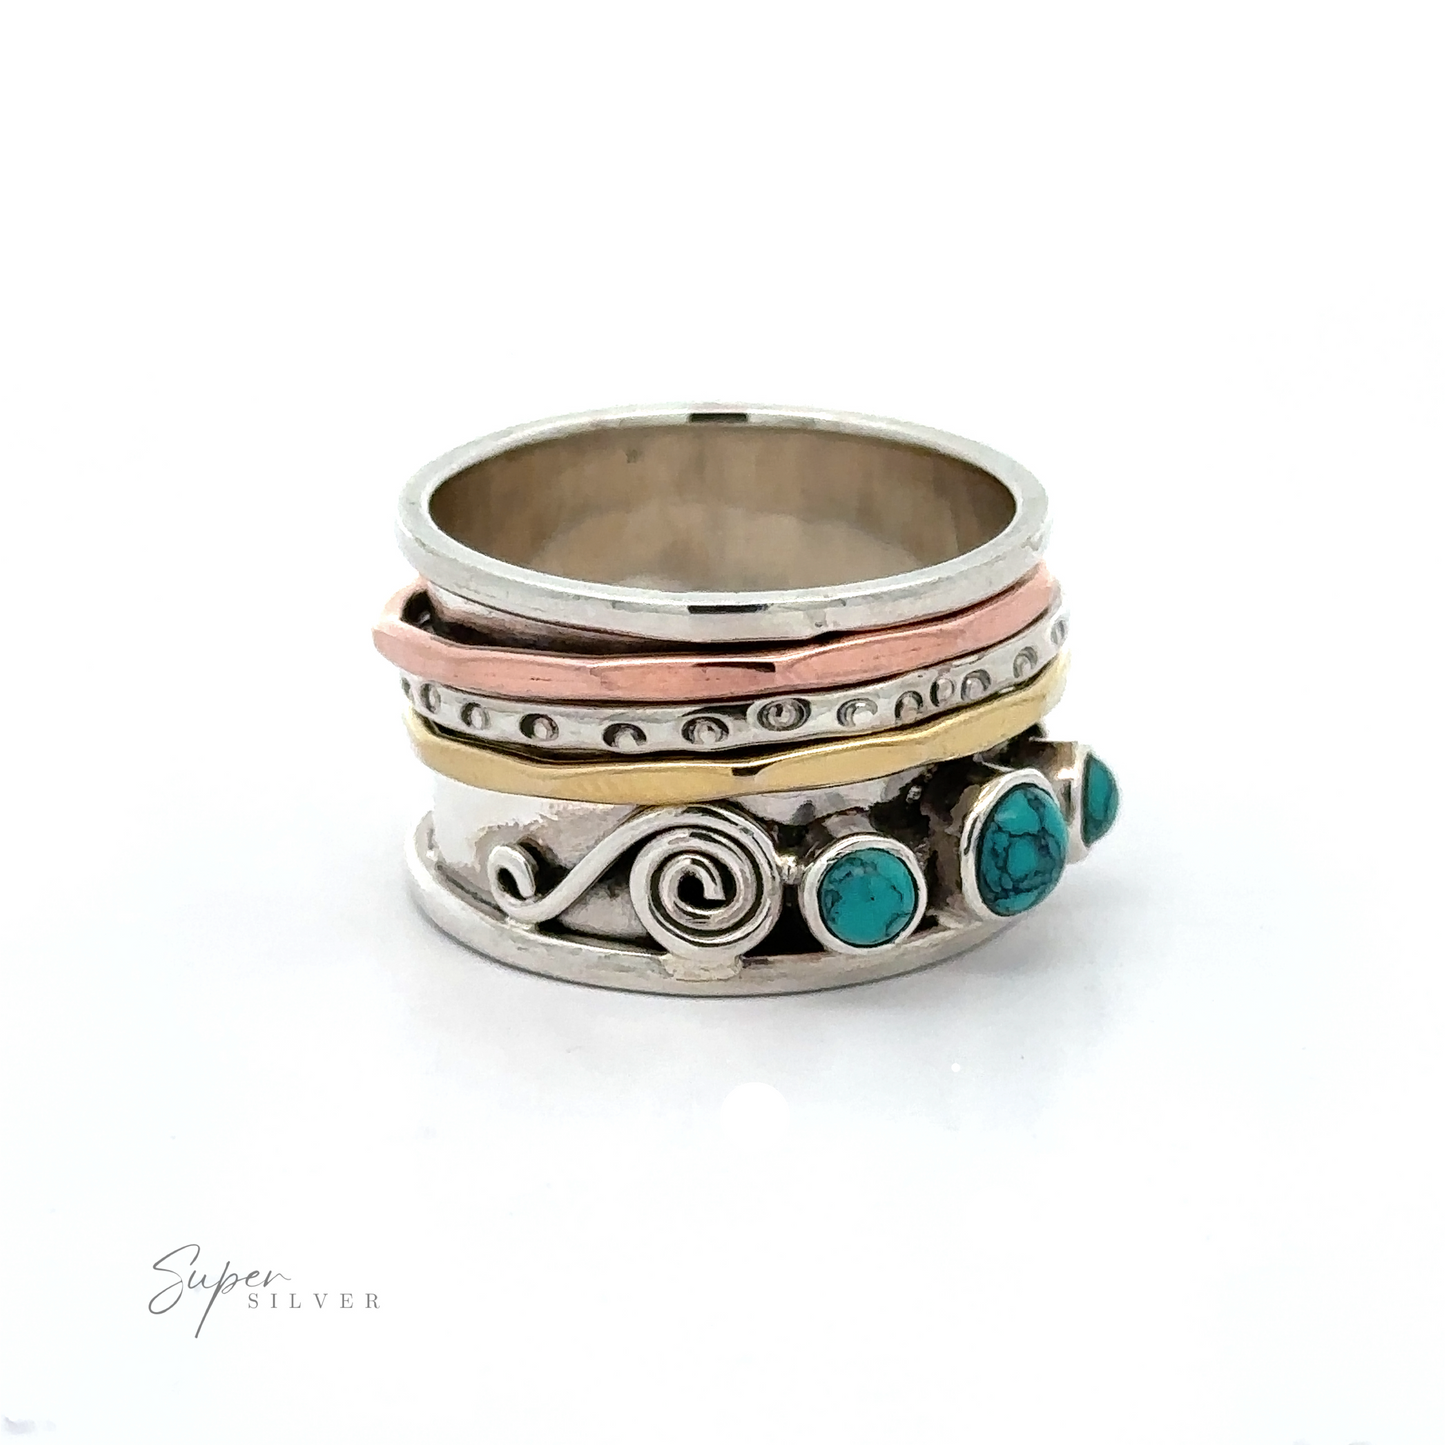 A Turquoise Spinner Band with Swirls.